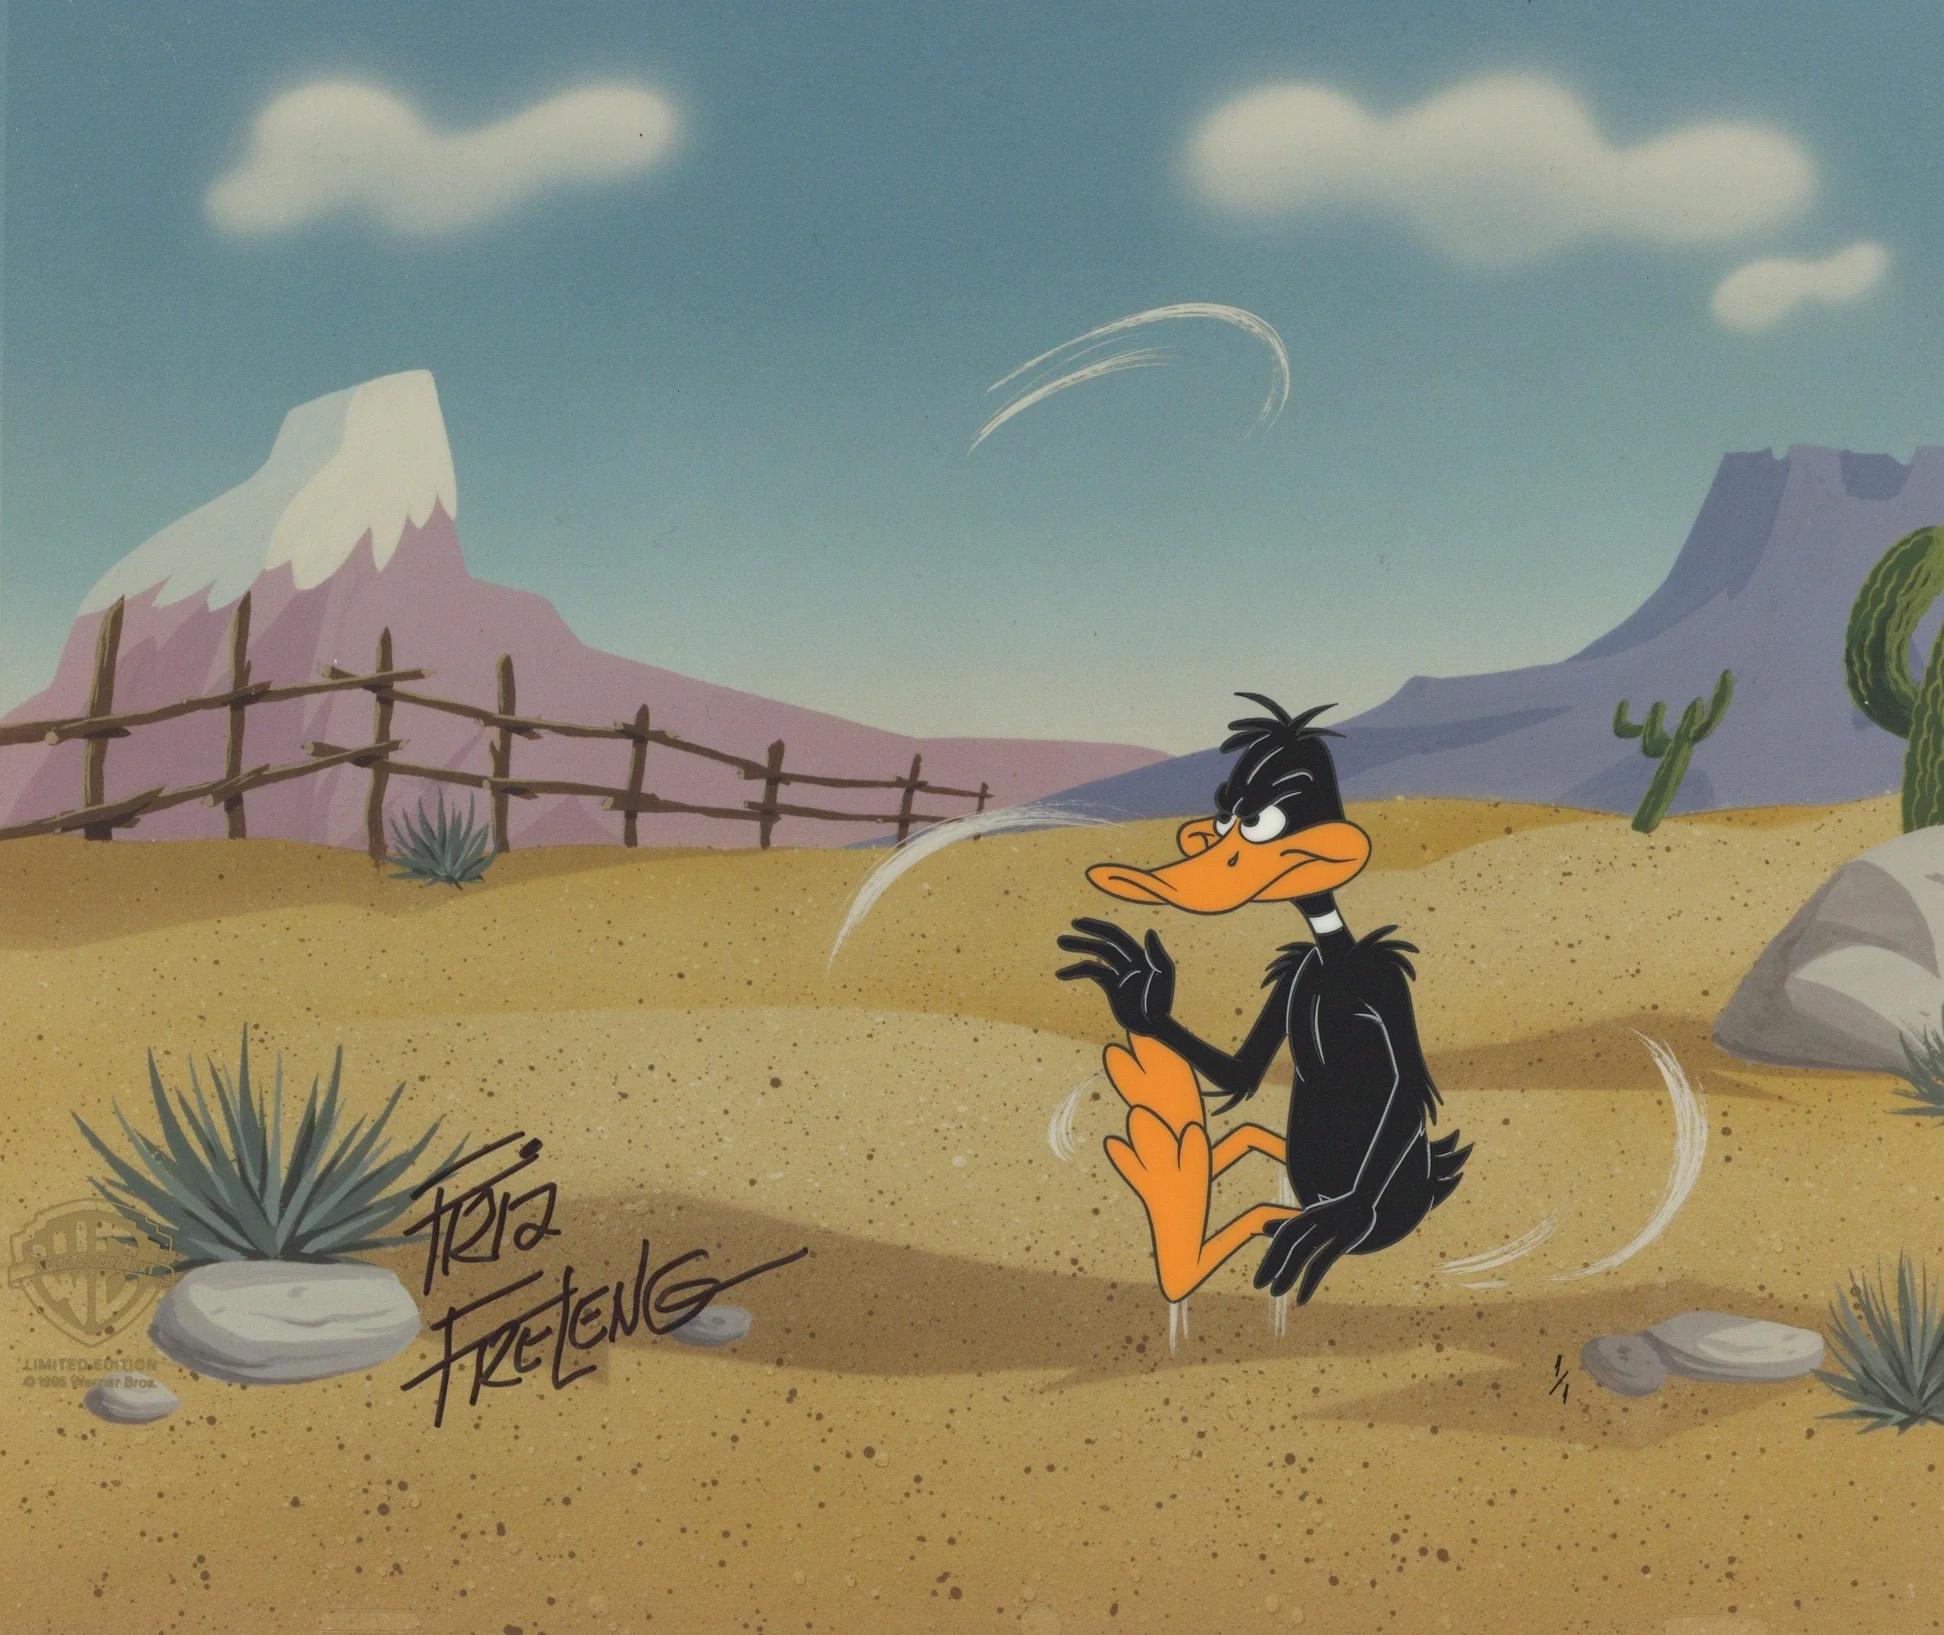 Looney Tunes Original Production Cel with Matching Drawing: Daffy Duck - Art by Warner Bros. Studio Artists